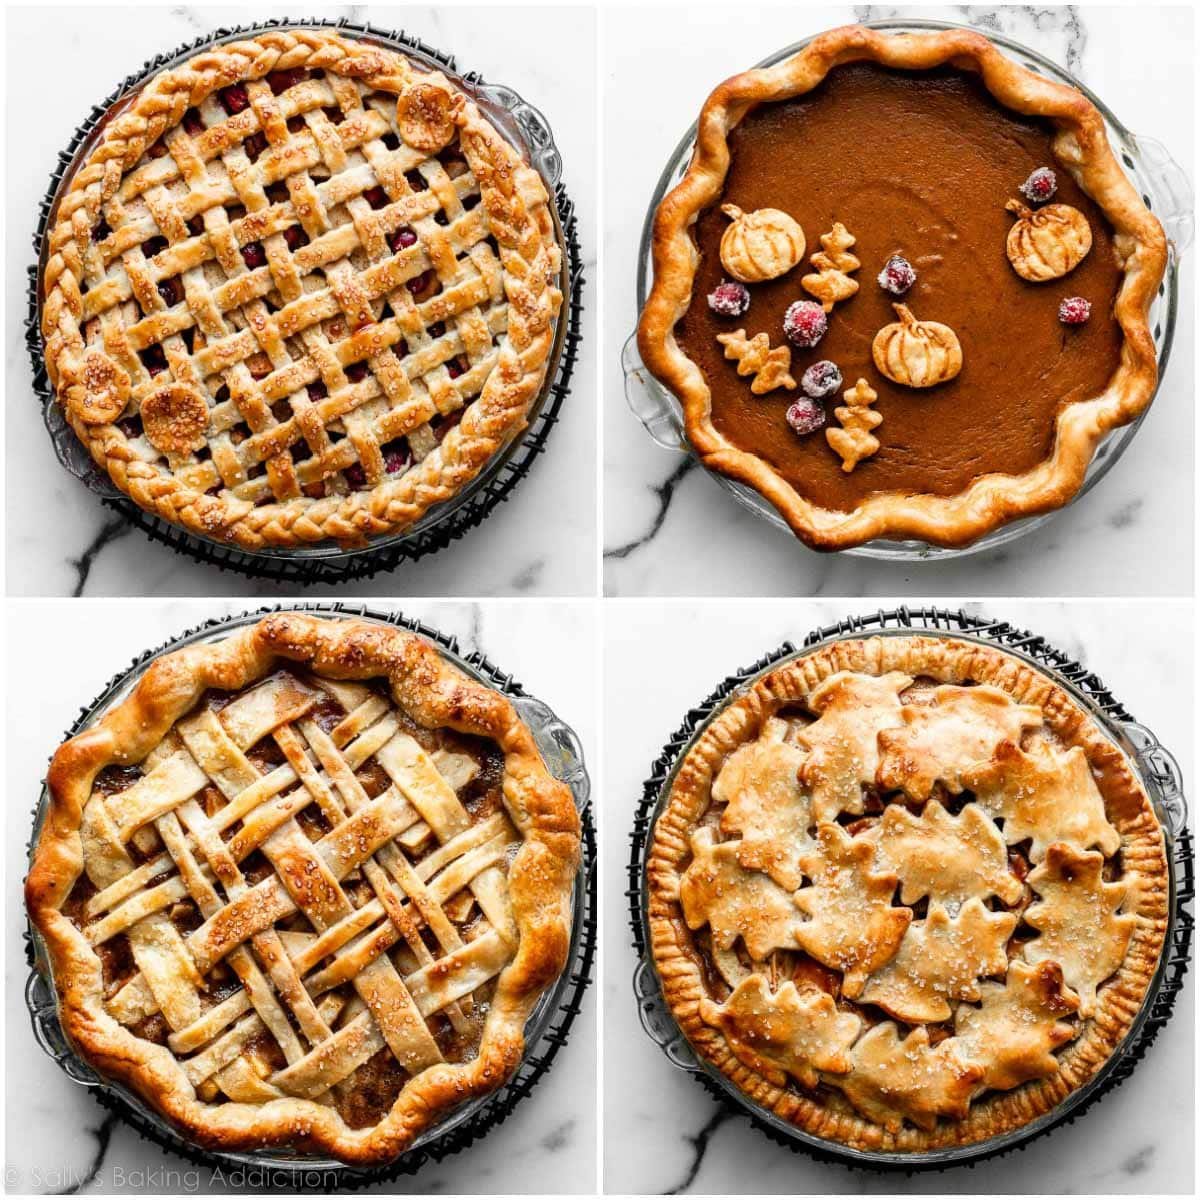 4 baked pies with different pie crust designs grouped together in a collage.